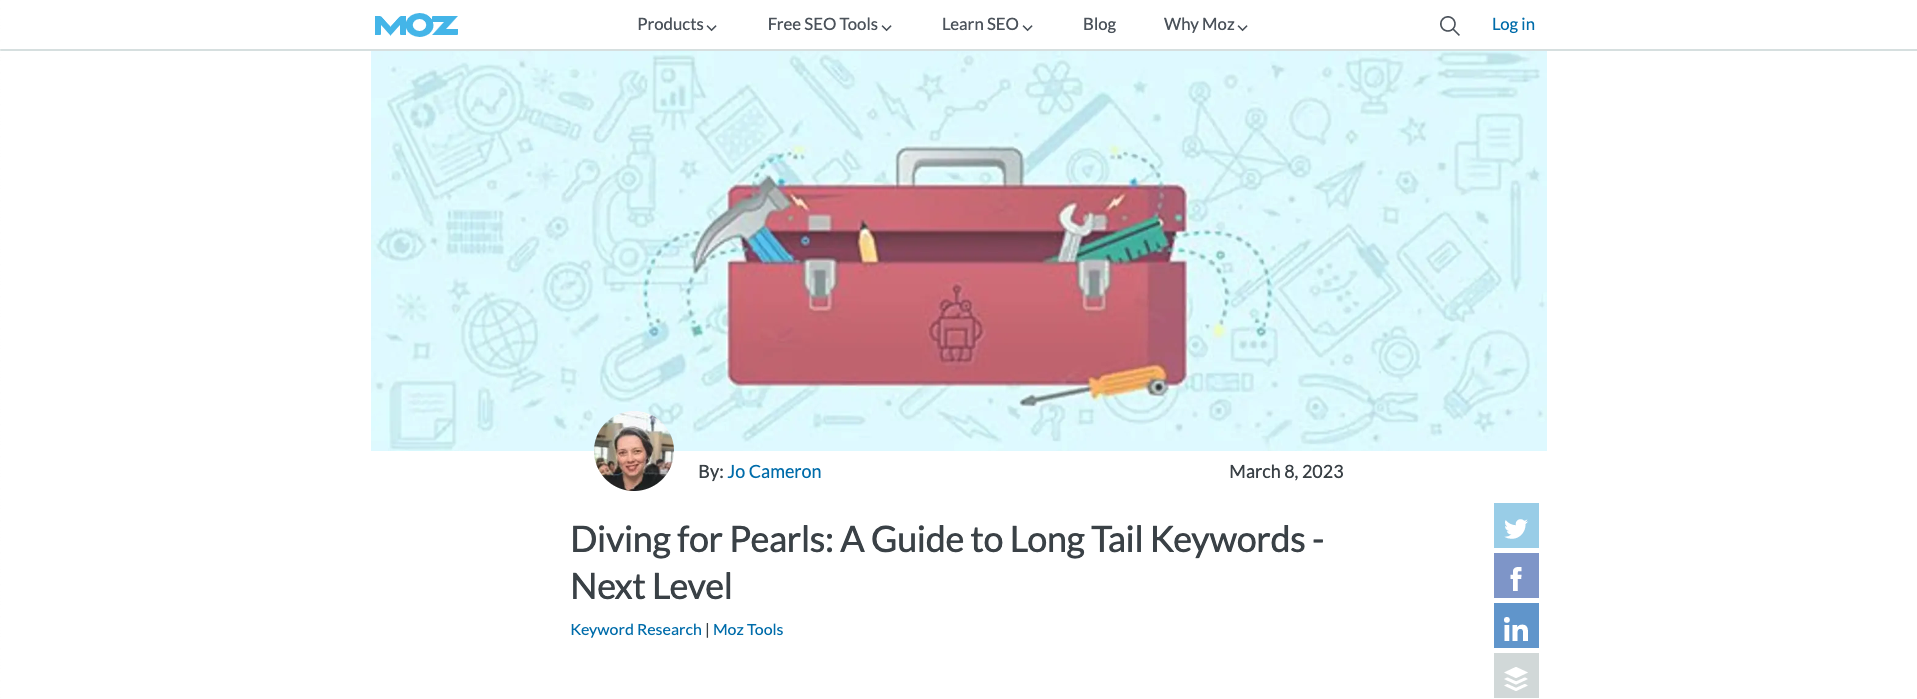 Diving for Pearls: A Guide to Long Tail Keywords – Next Level